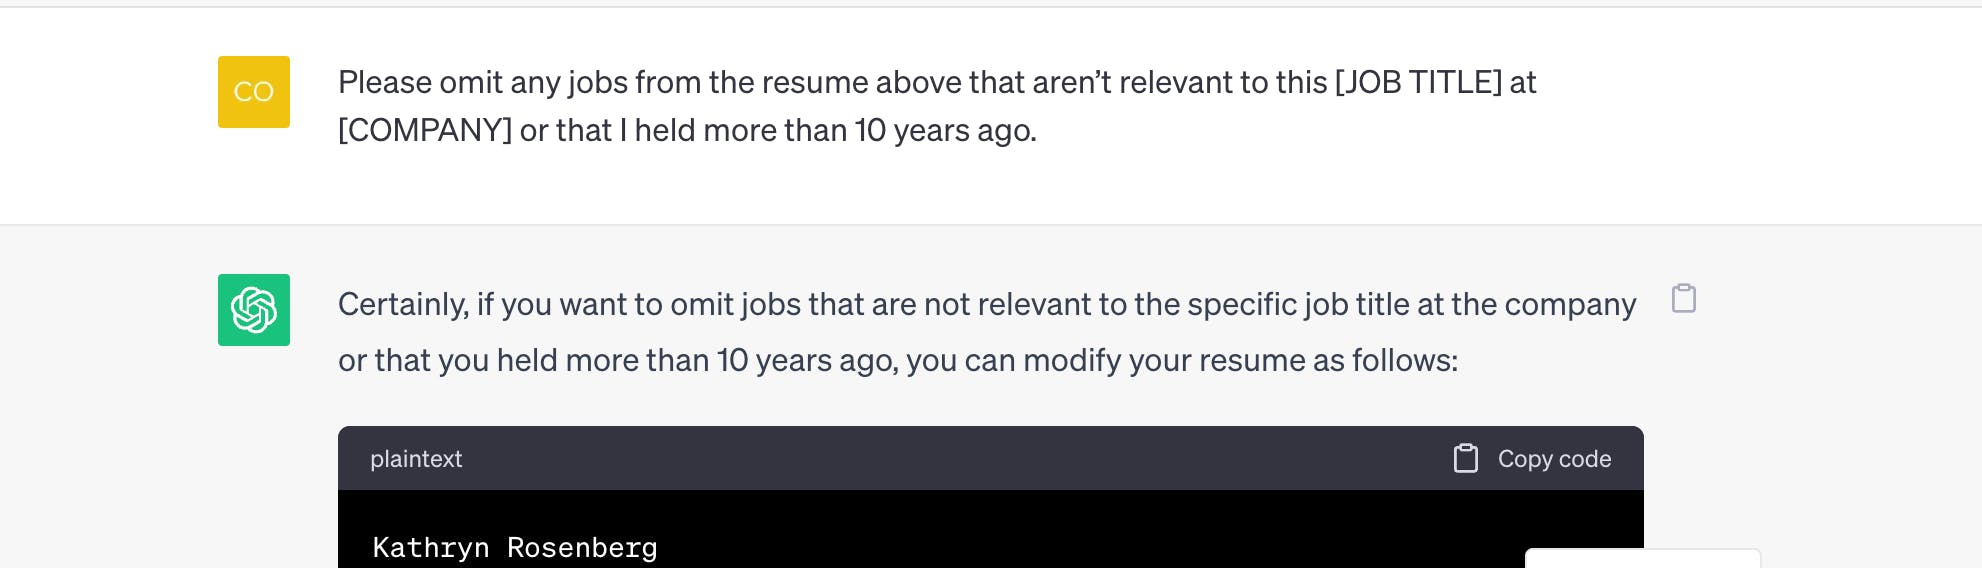 ChatGPT prompt for omitting old jobs from a resume